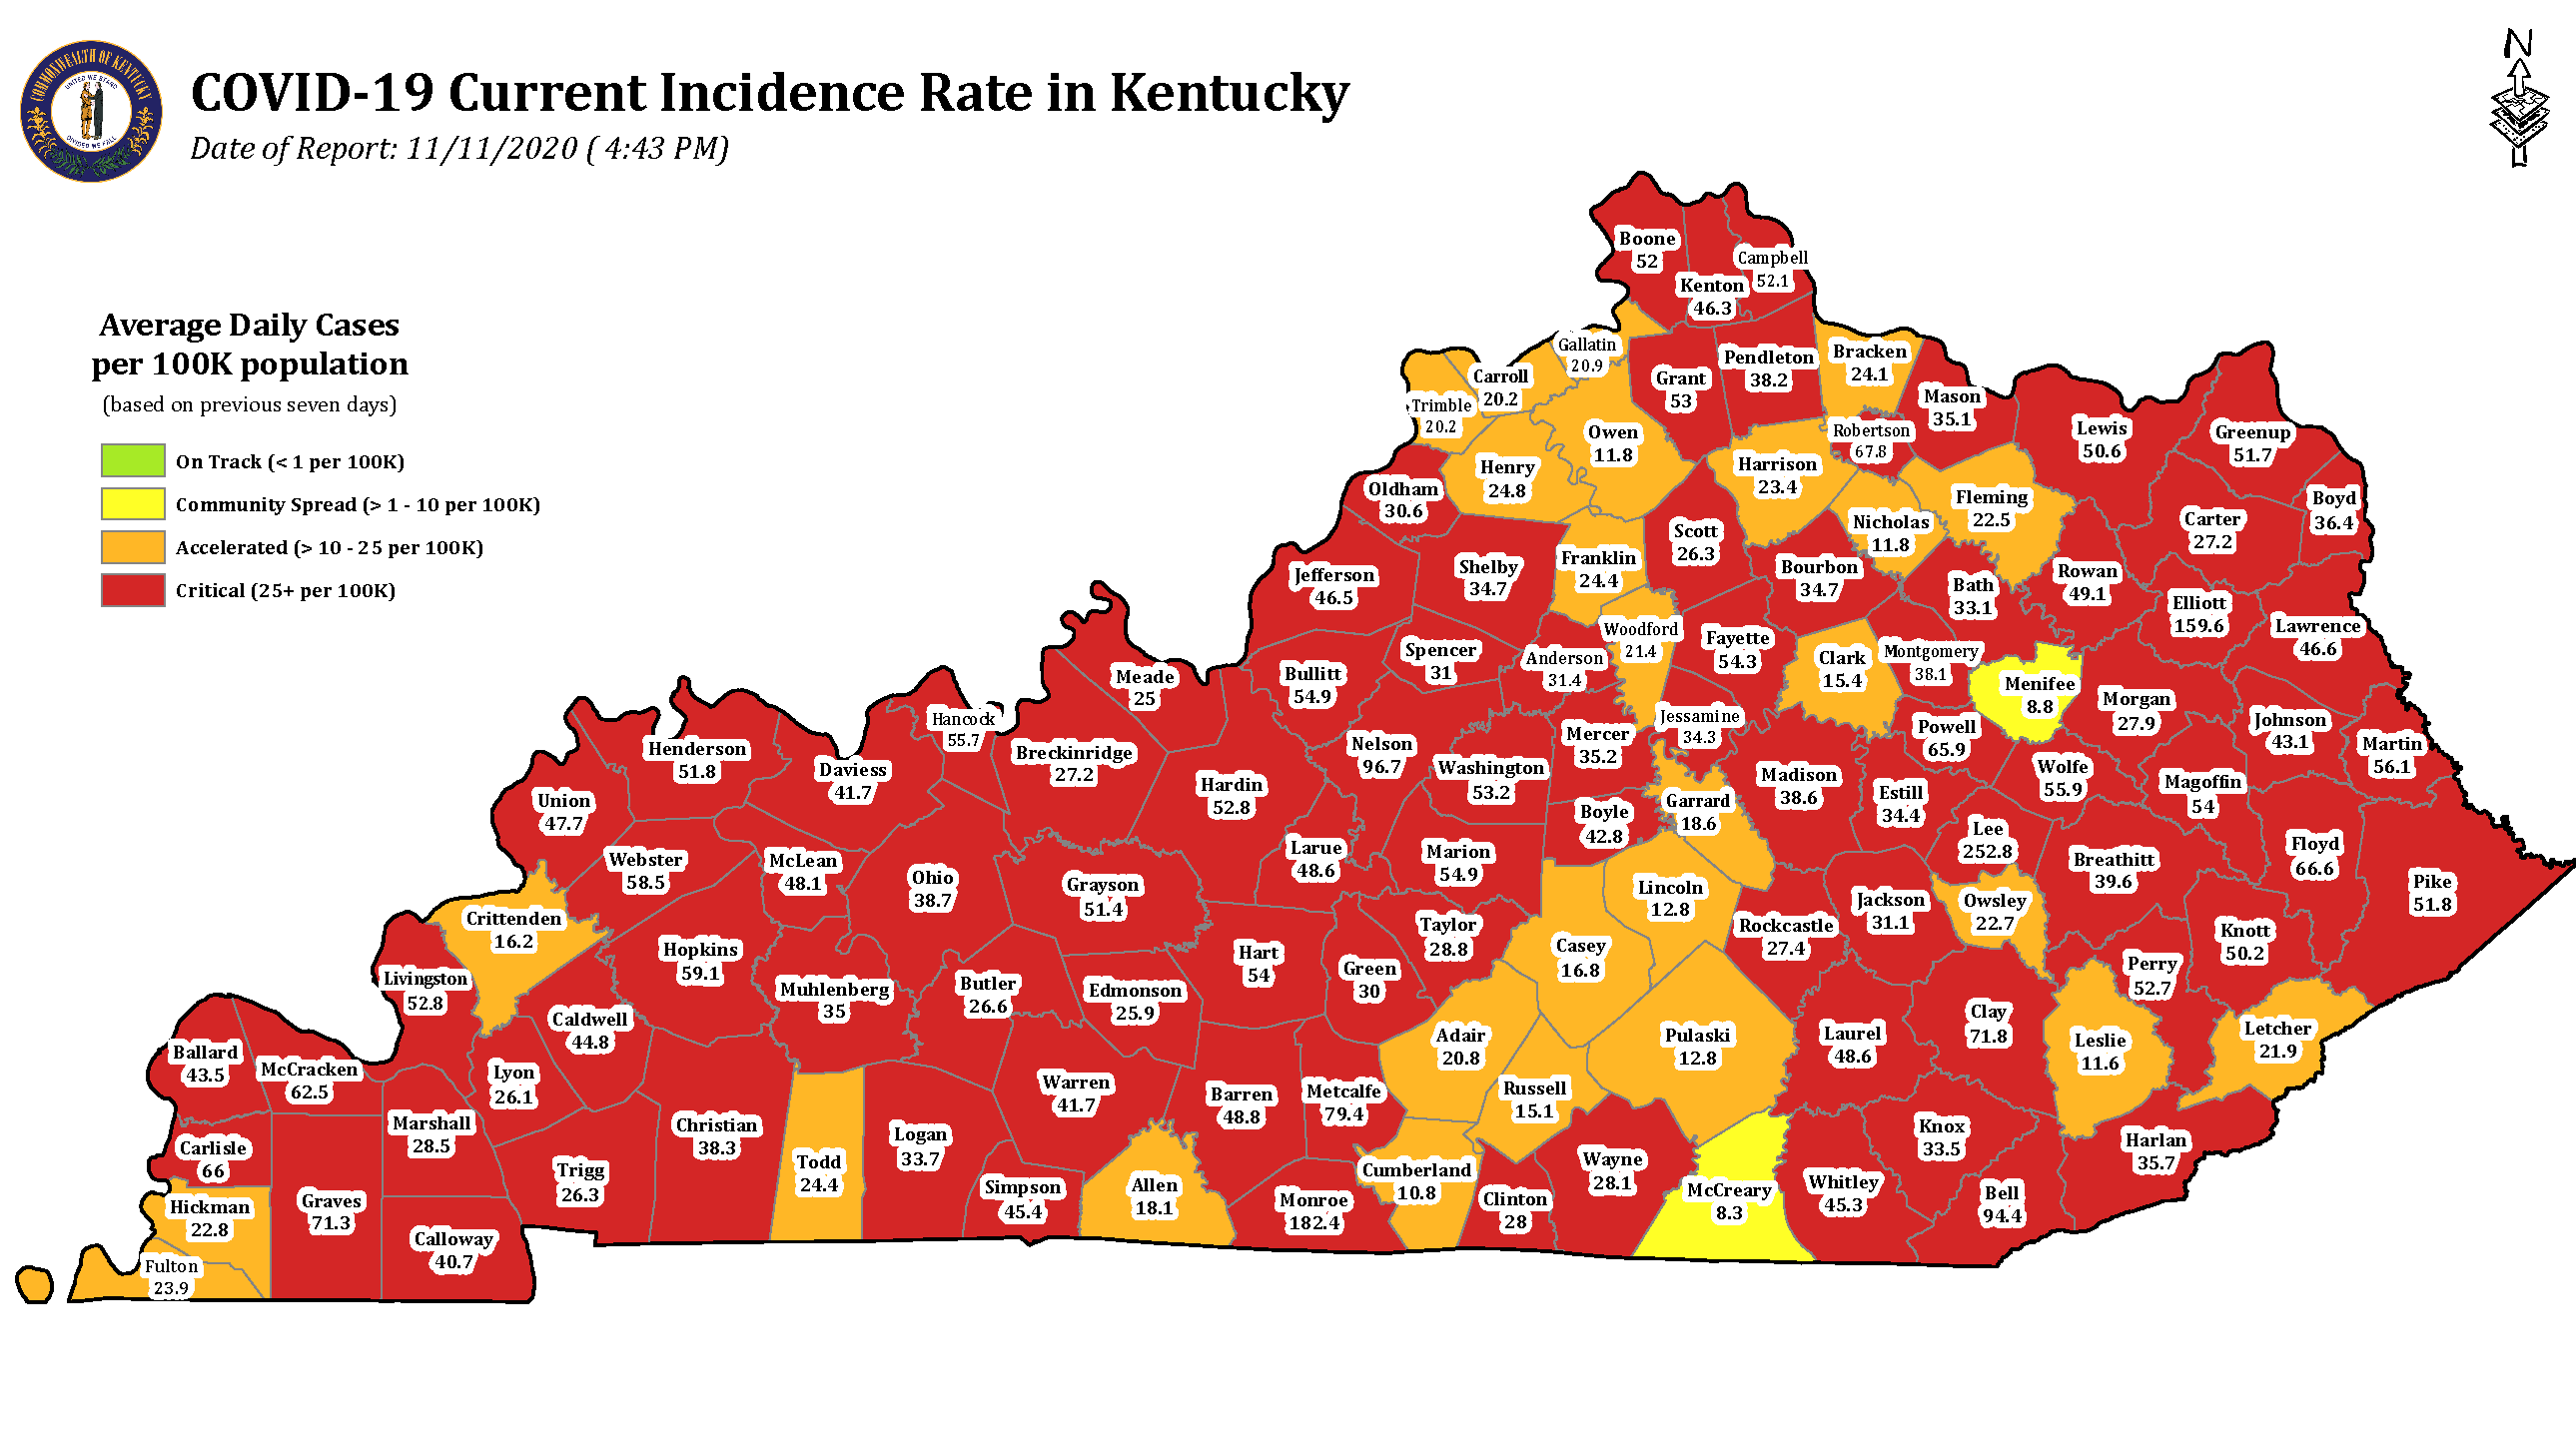 Kentucky sets new daily record for COVID-19